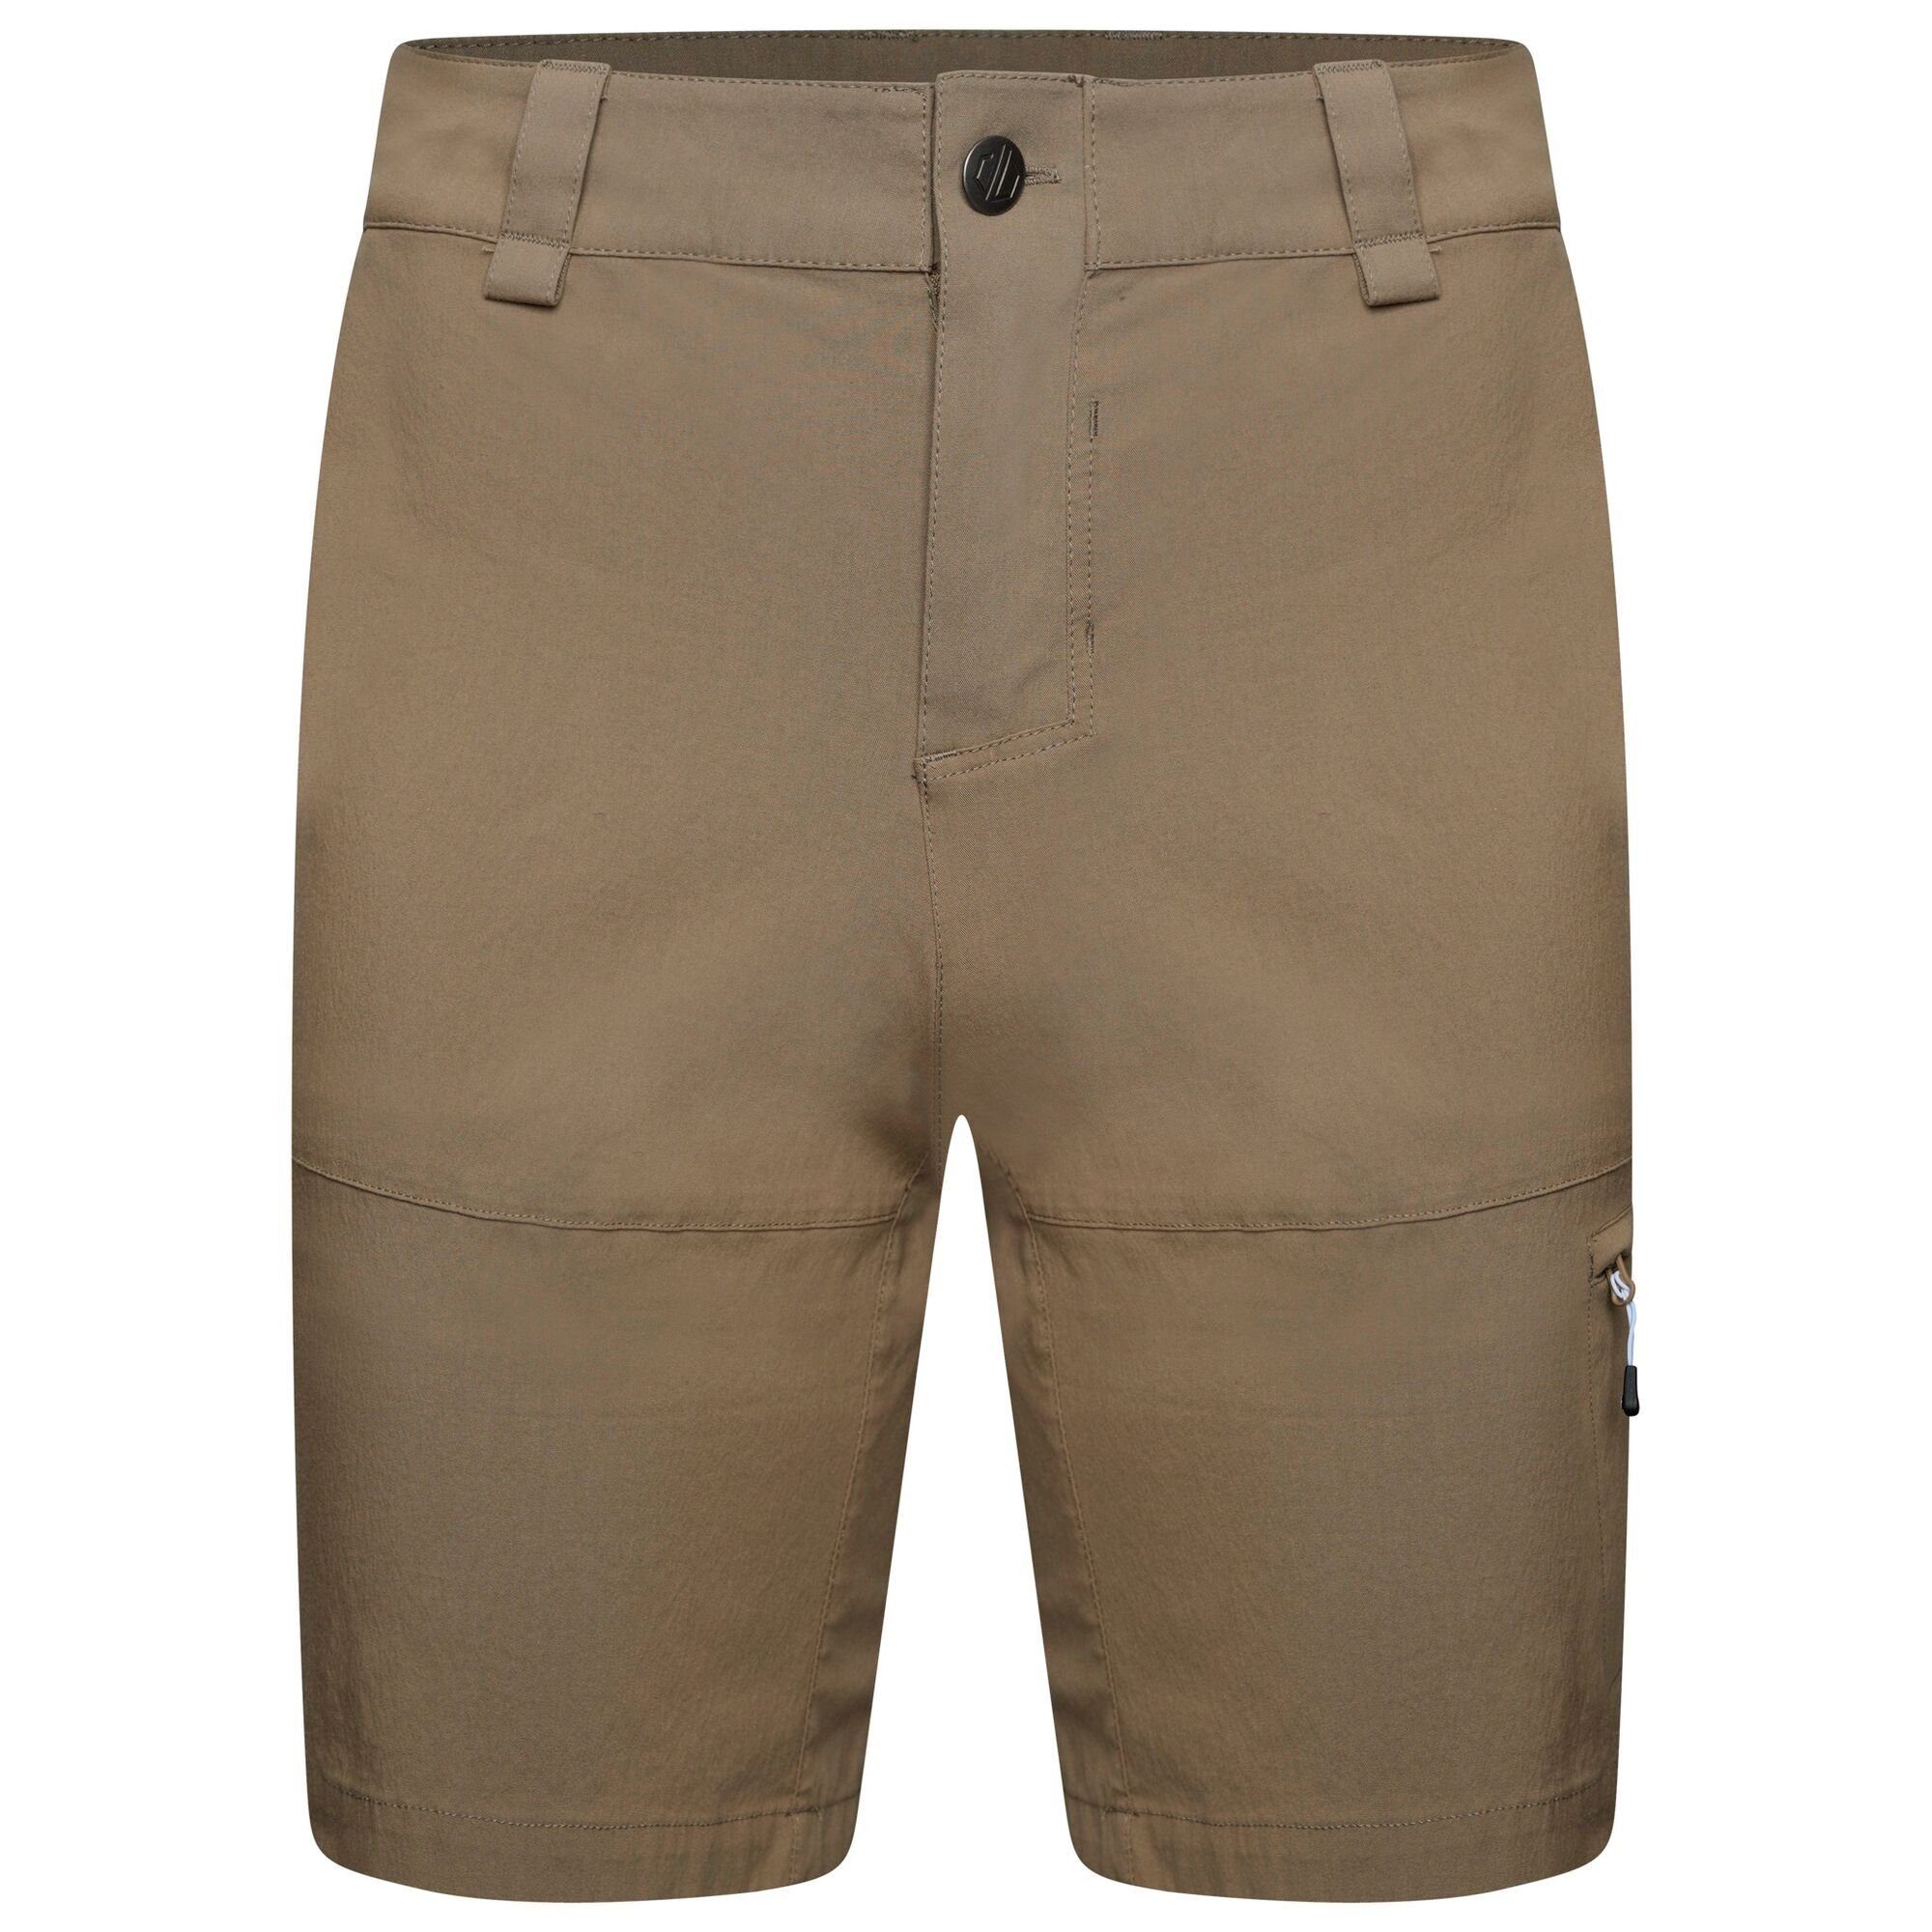 Dare2b Outdoorhose In Sand Gold Tuned Offbeat